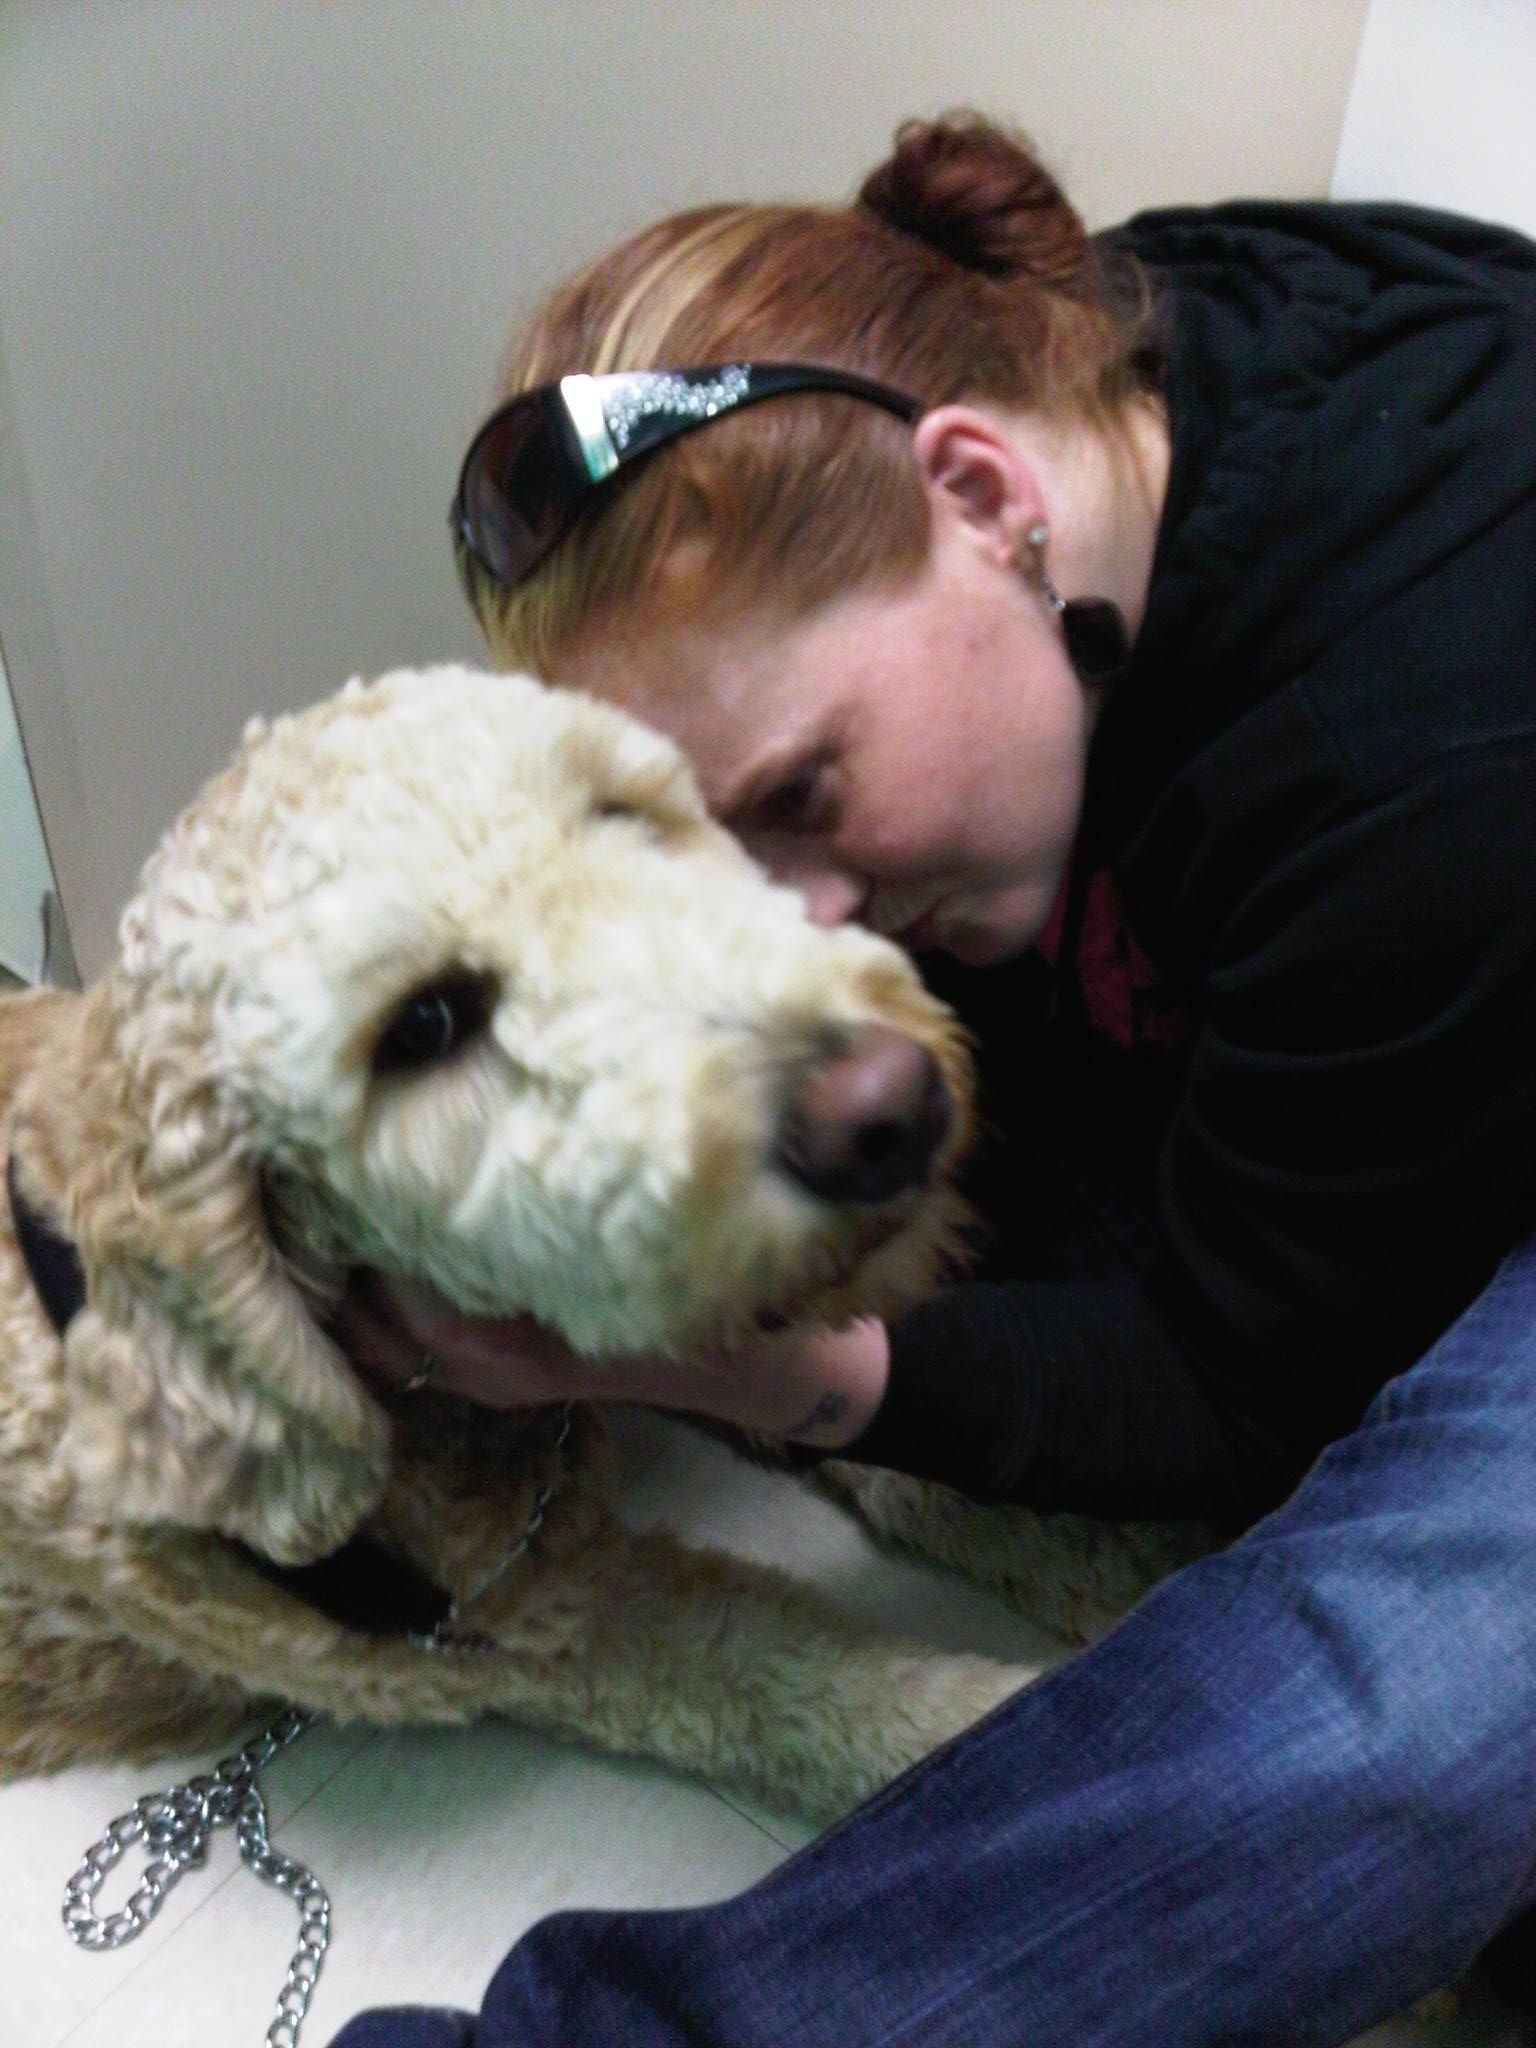 Me and Toby my Big Ole Goldendoodle at the vets office!